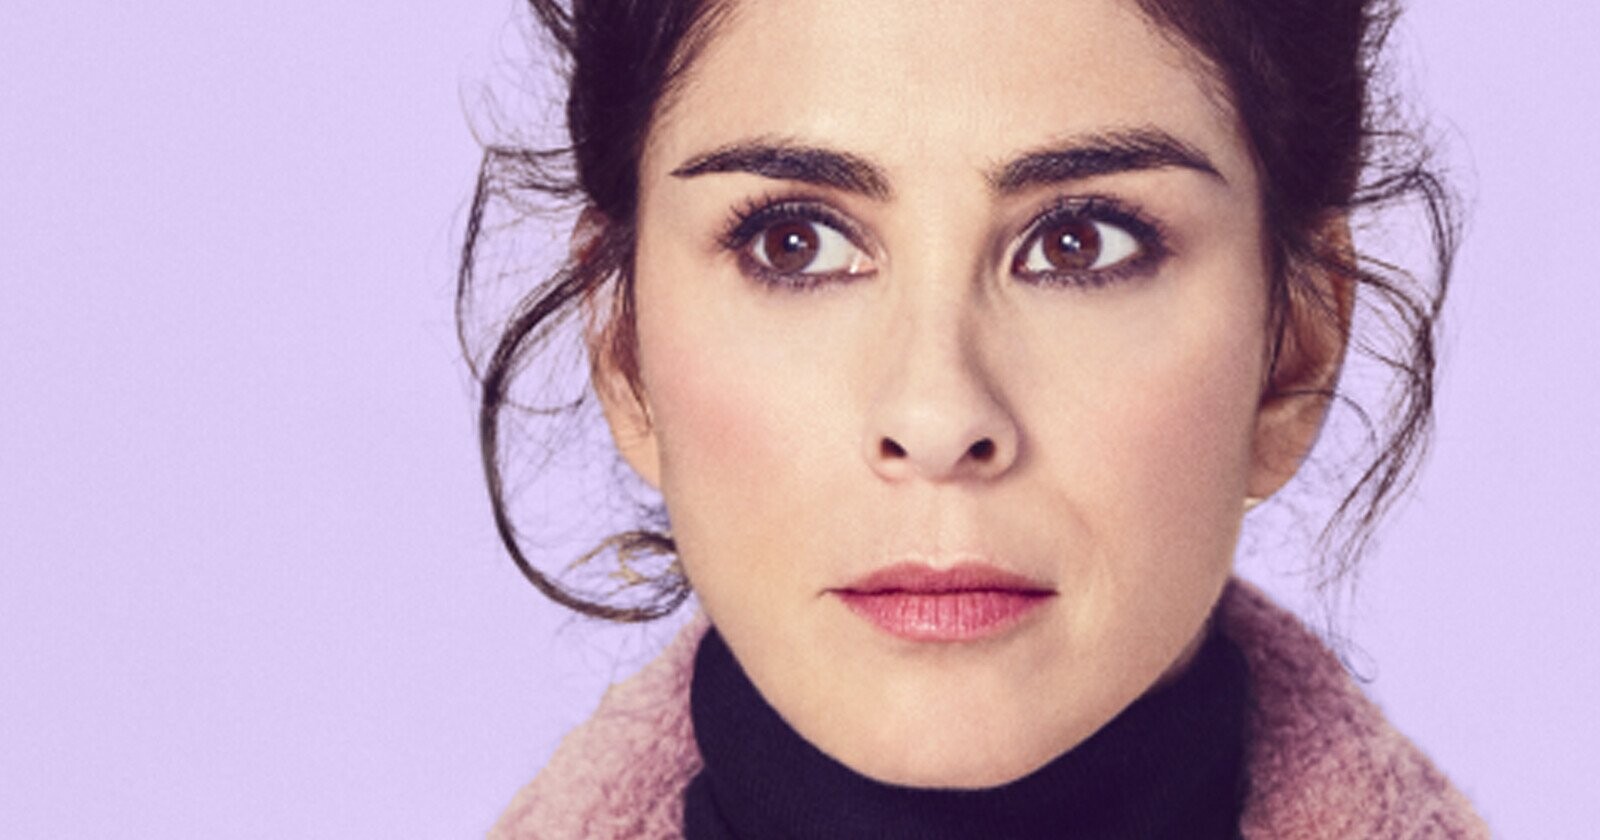 Sarah Silverman Moves On Without Going Anywhere